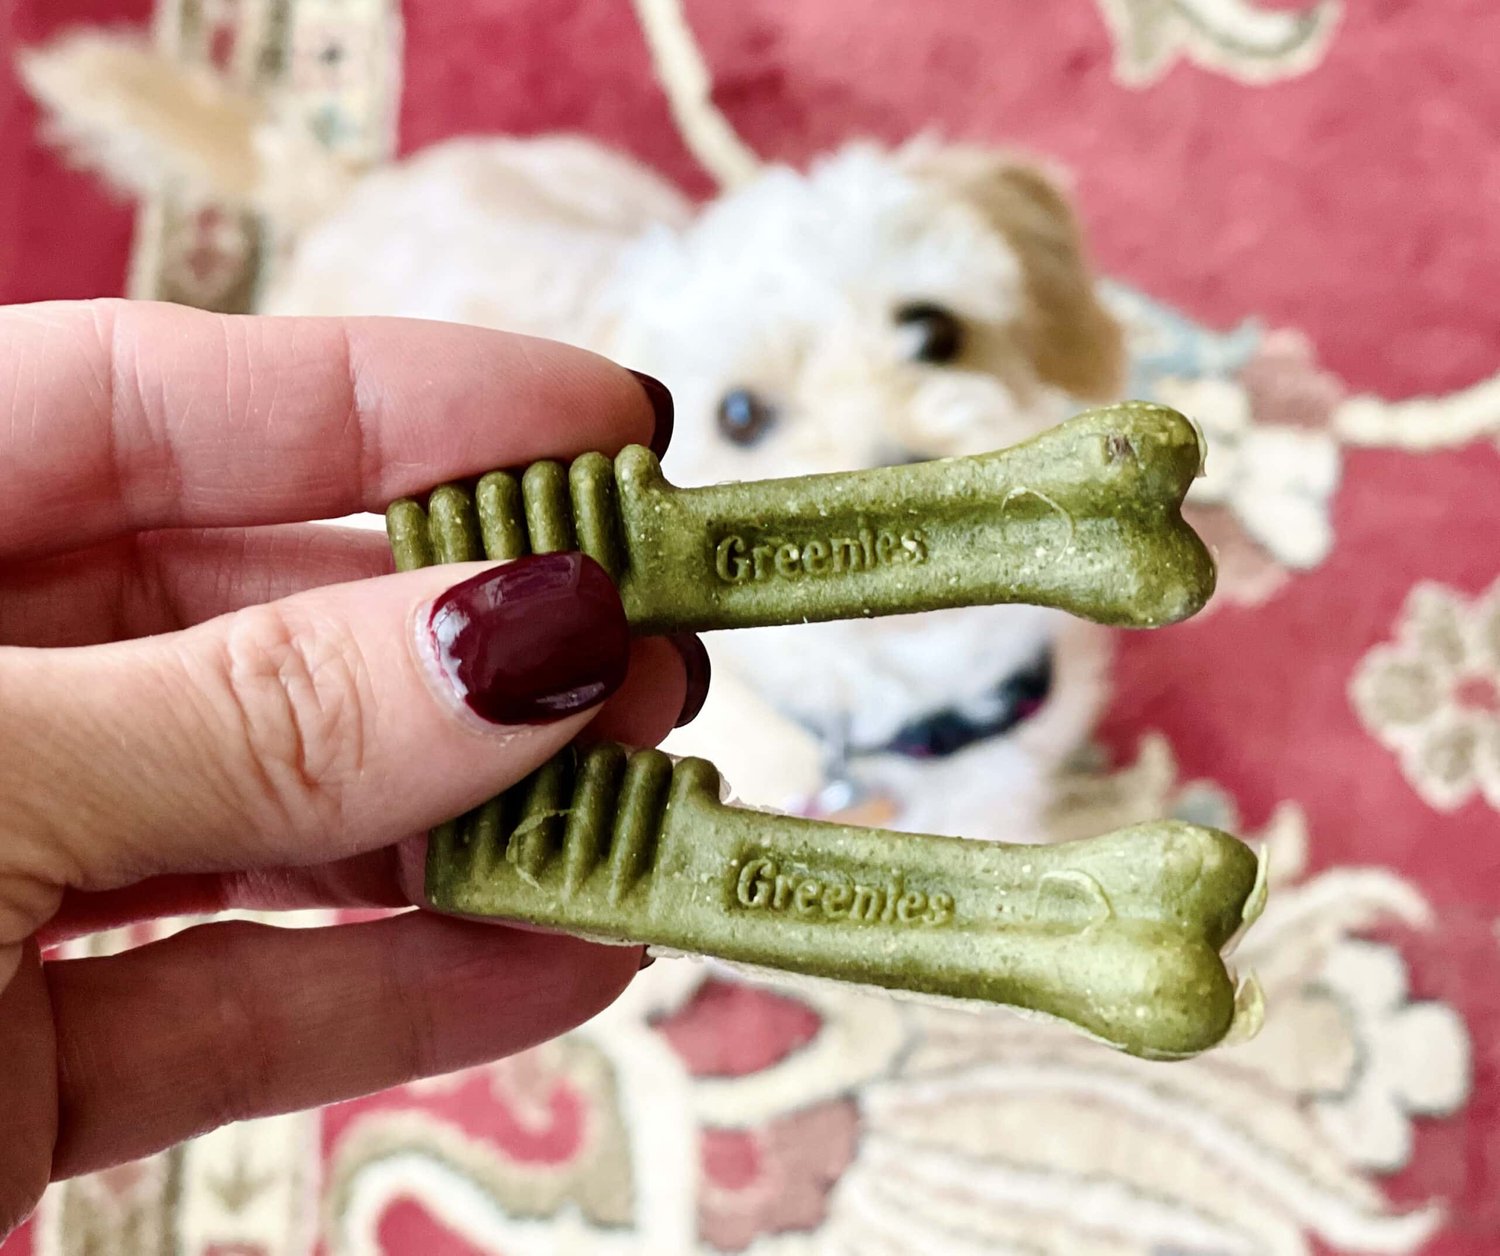 are greenies good for chihuahua?